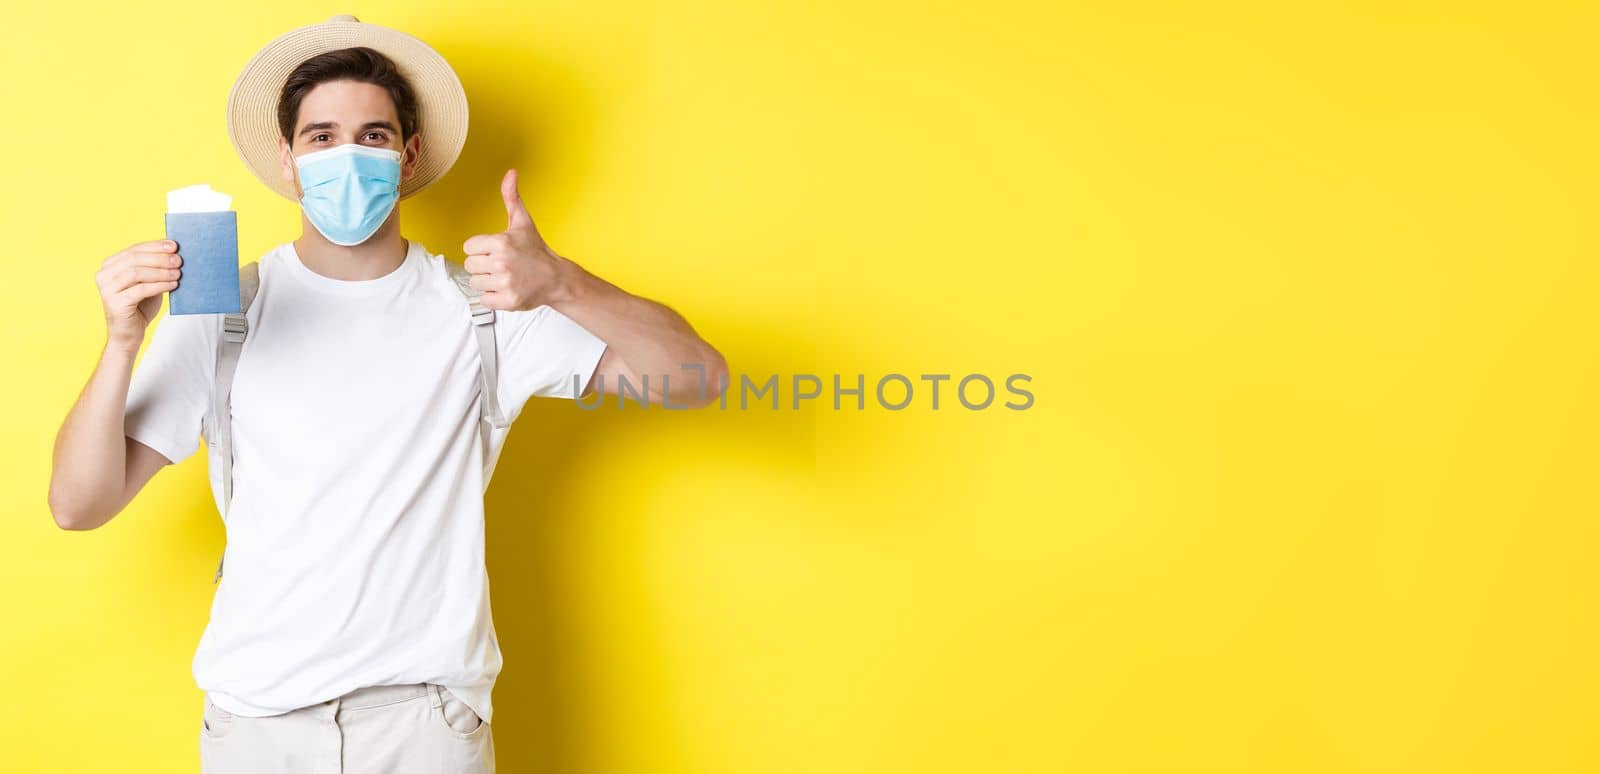 Concept of covid-19, tourism and pandemic. Happy male tourist in medical mask showing passport, going on vacation during coronavirus, make thumb up sign, yellow background.